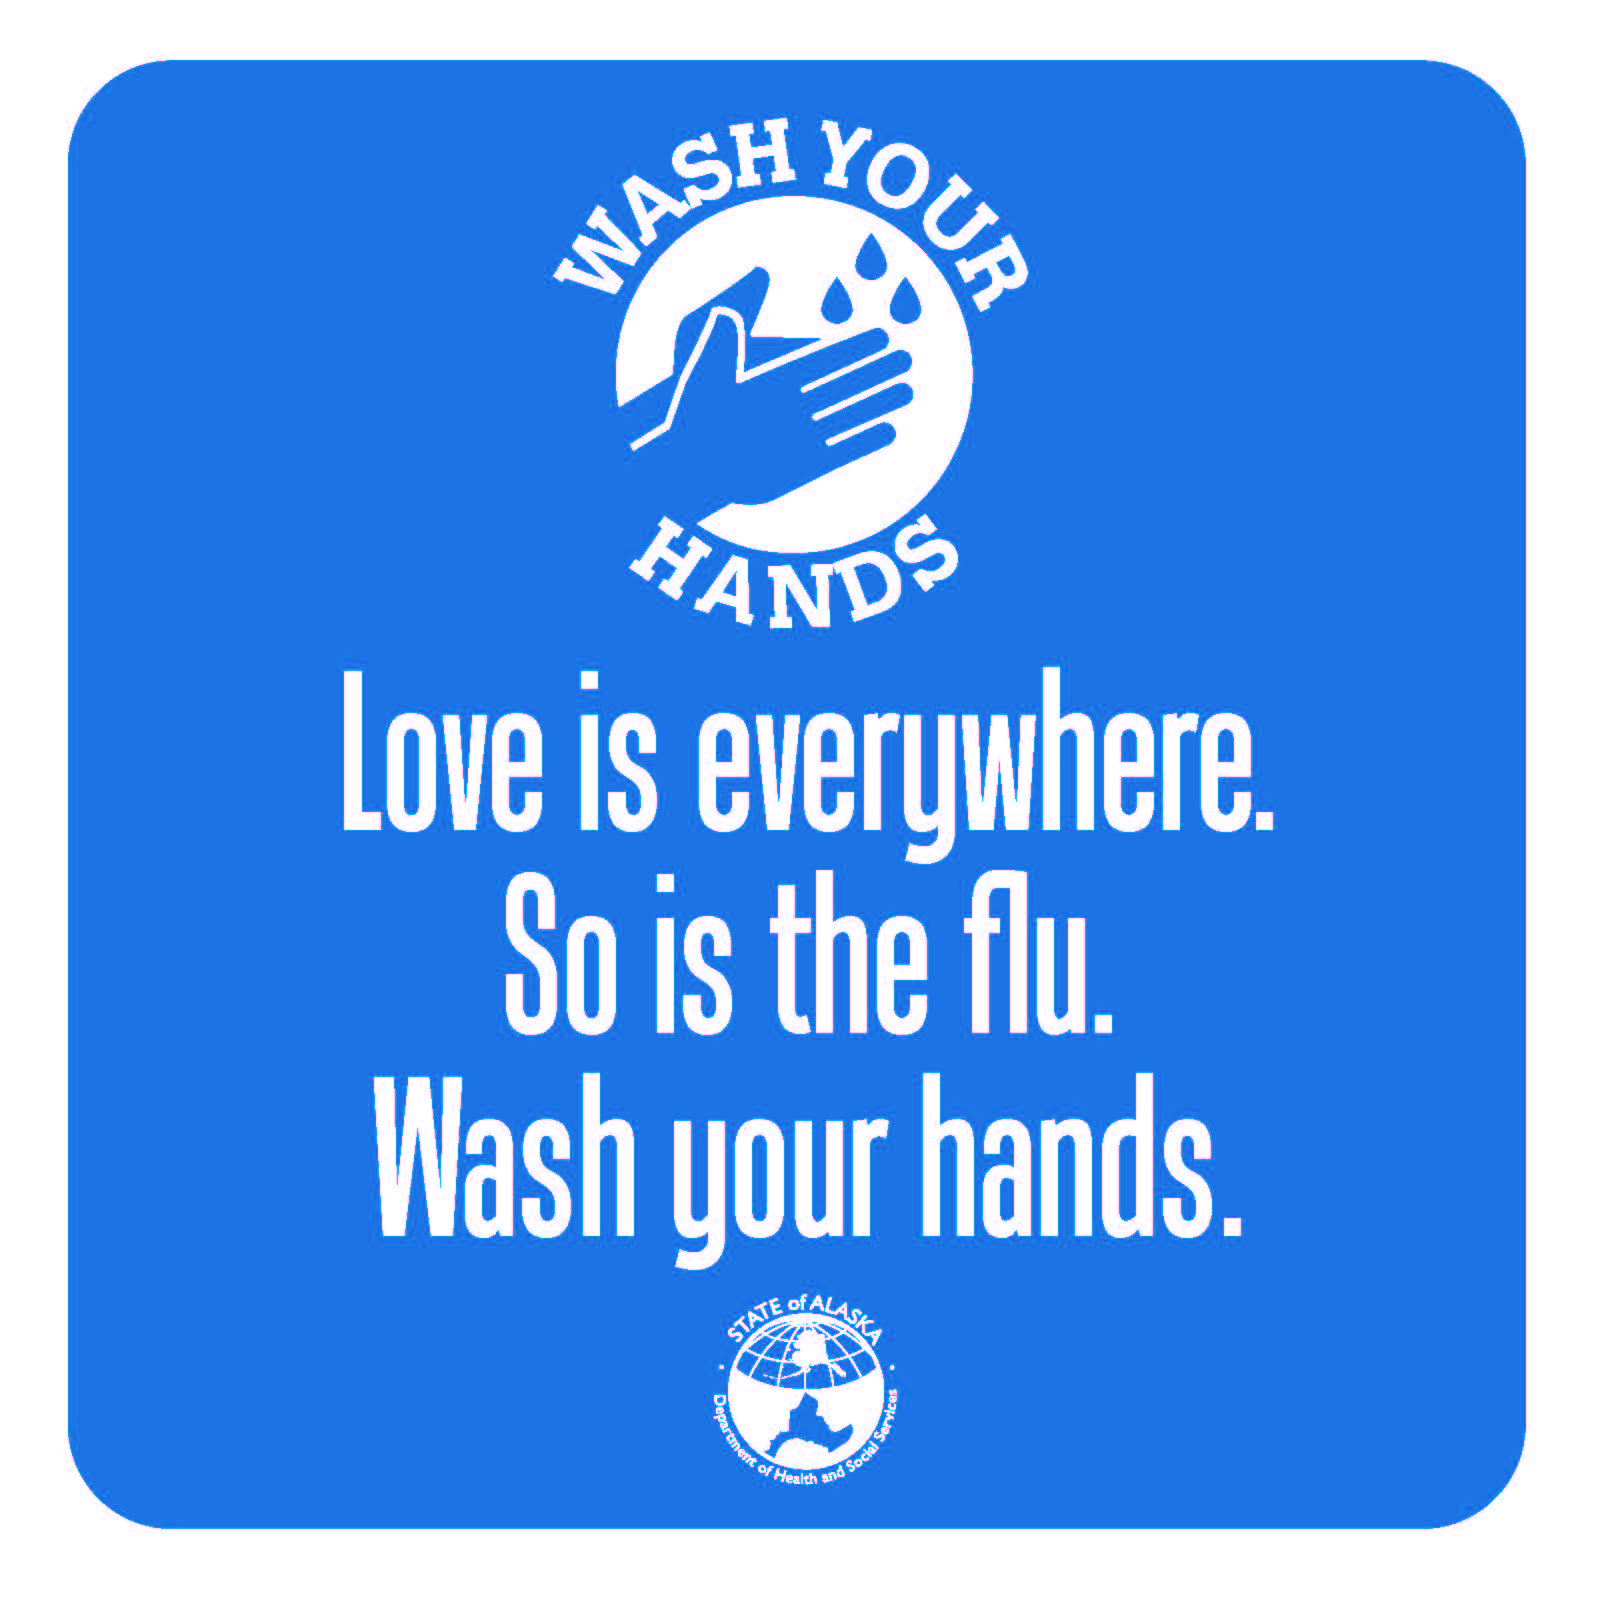 Wash your hands: Love is everywhere. So is the flu. 